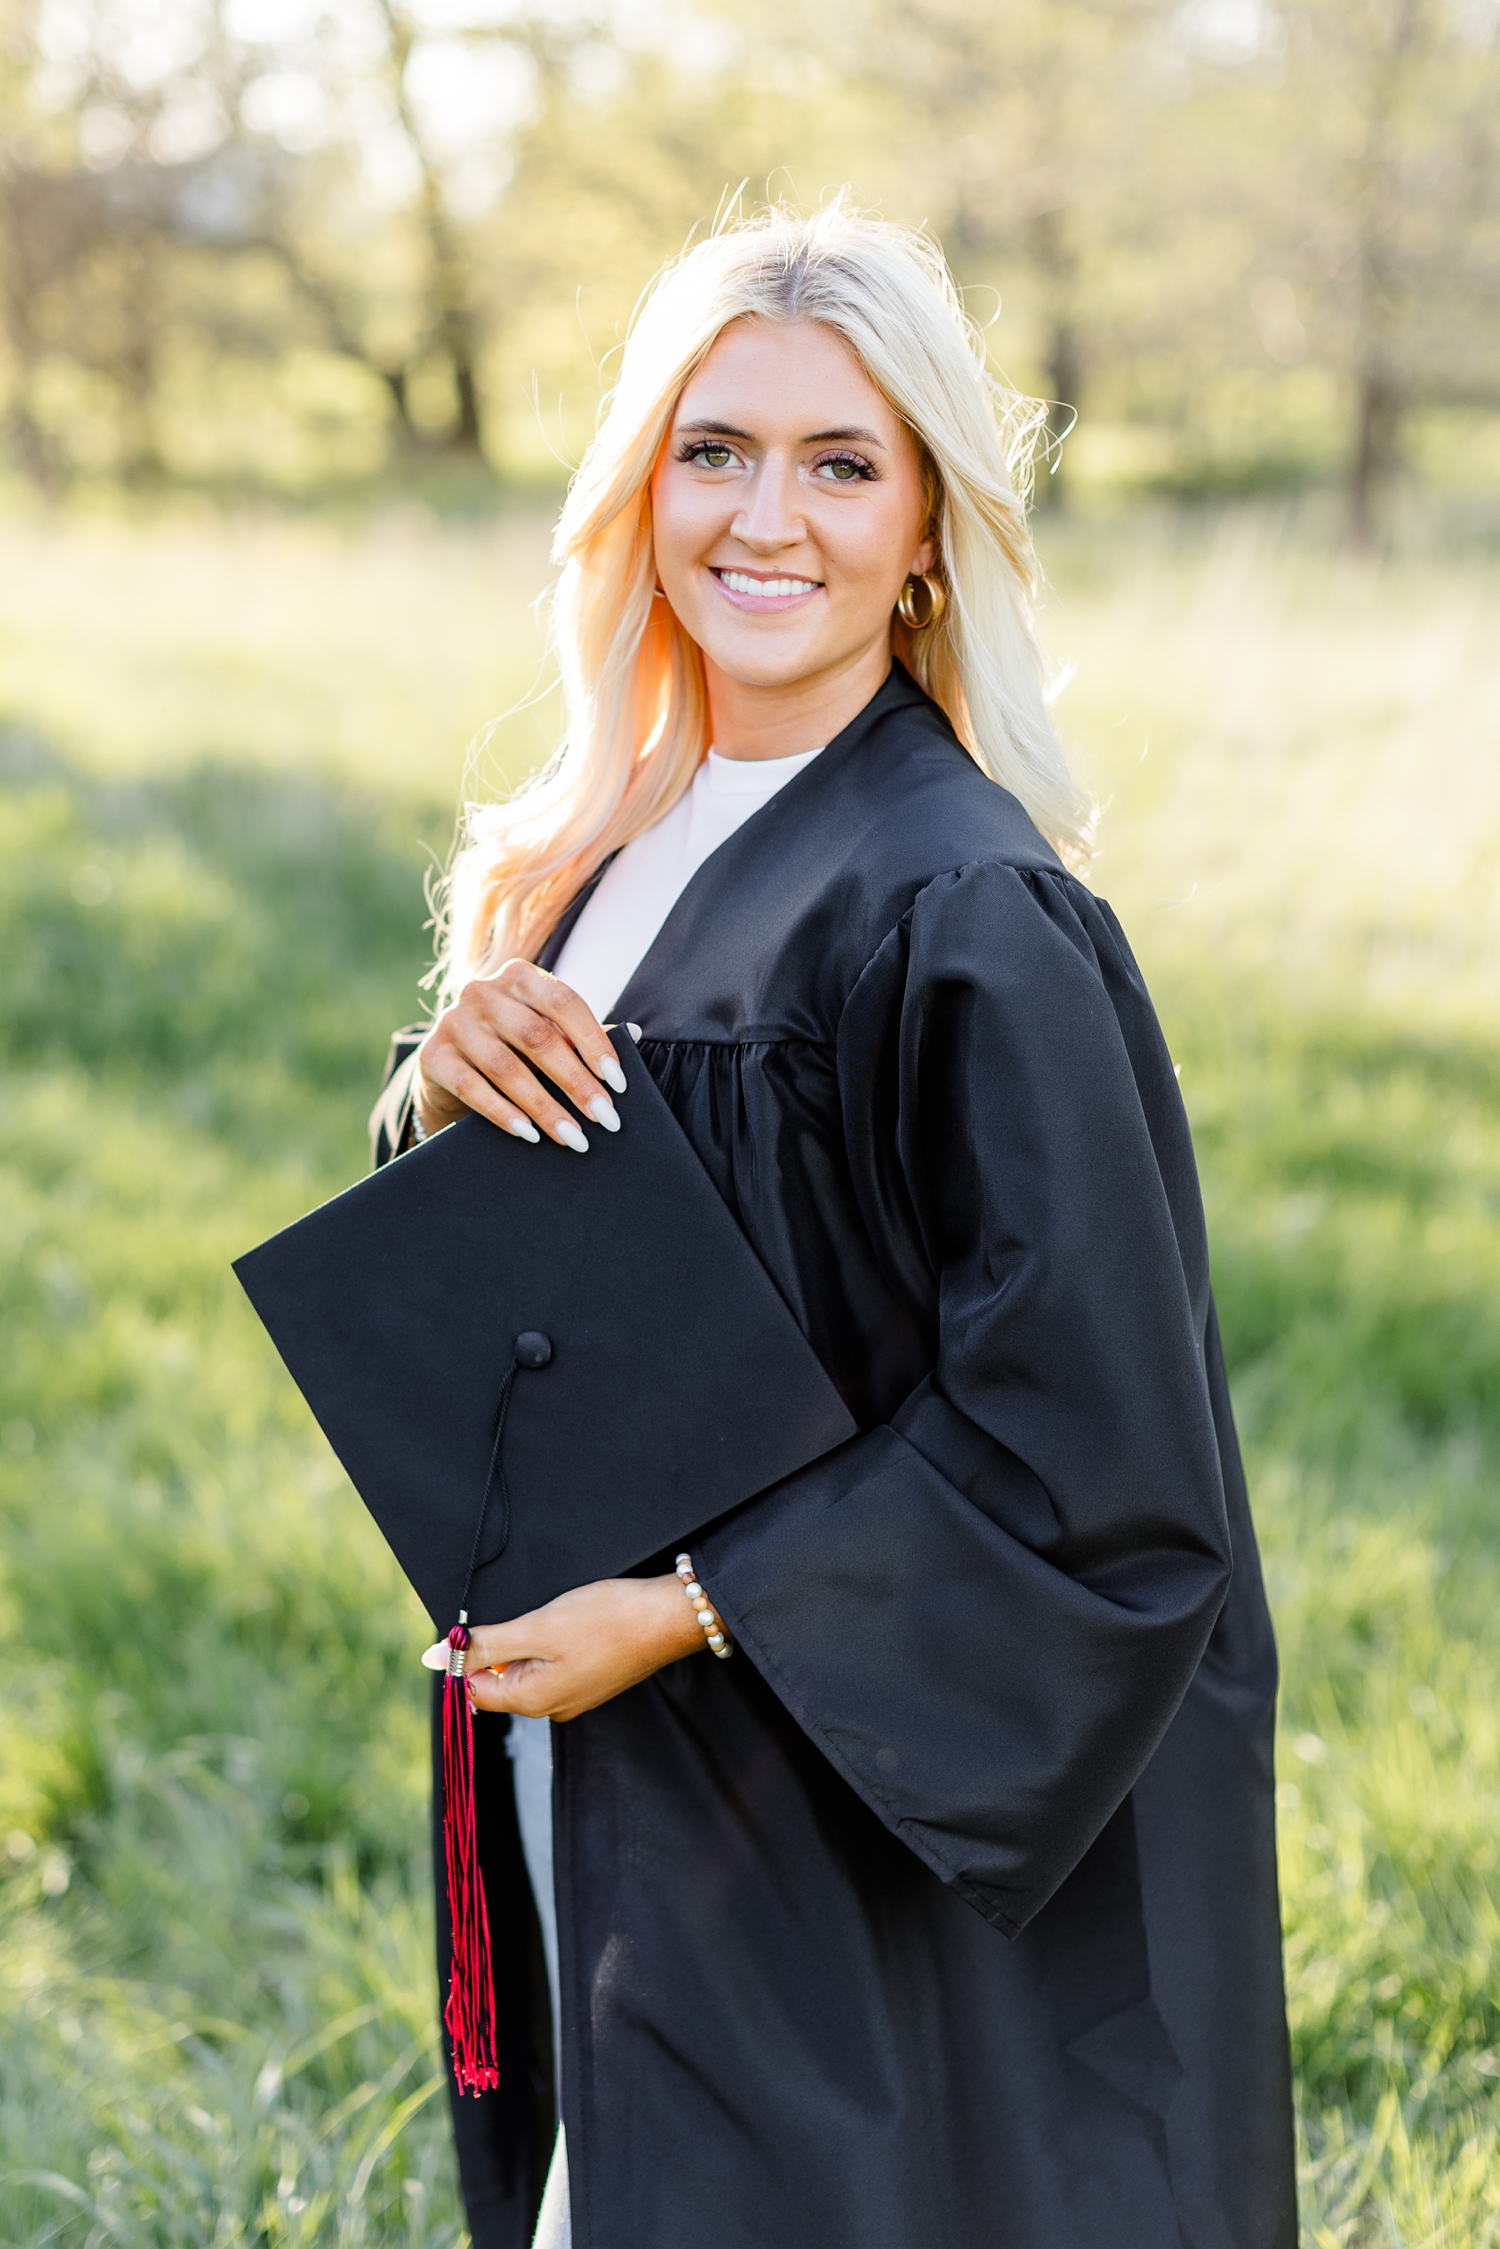 Jenna poses with her graduation cap and gown in a grassy pasture | CB Studio